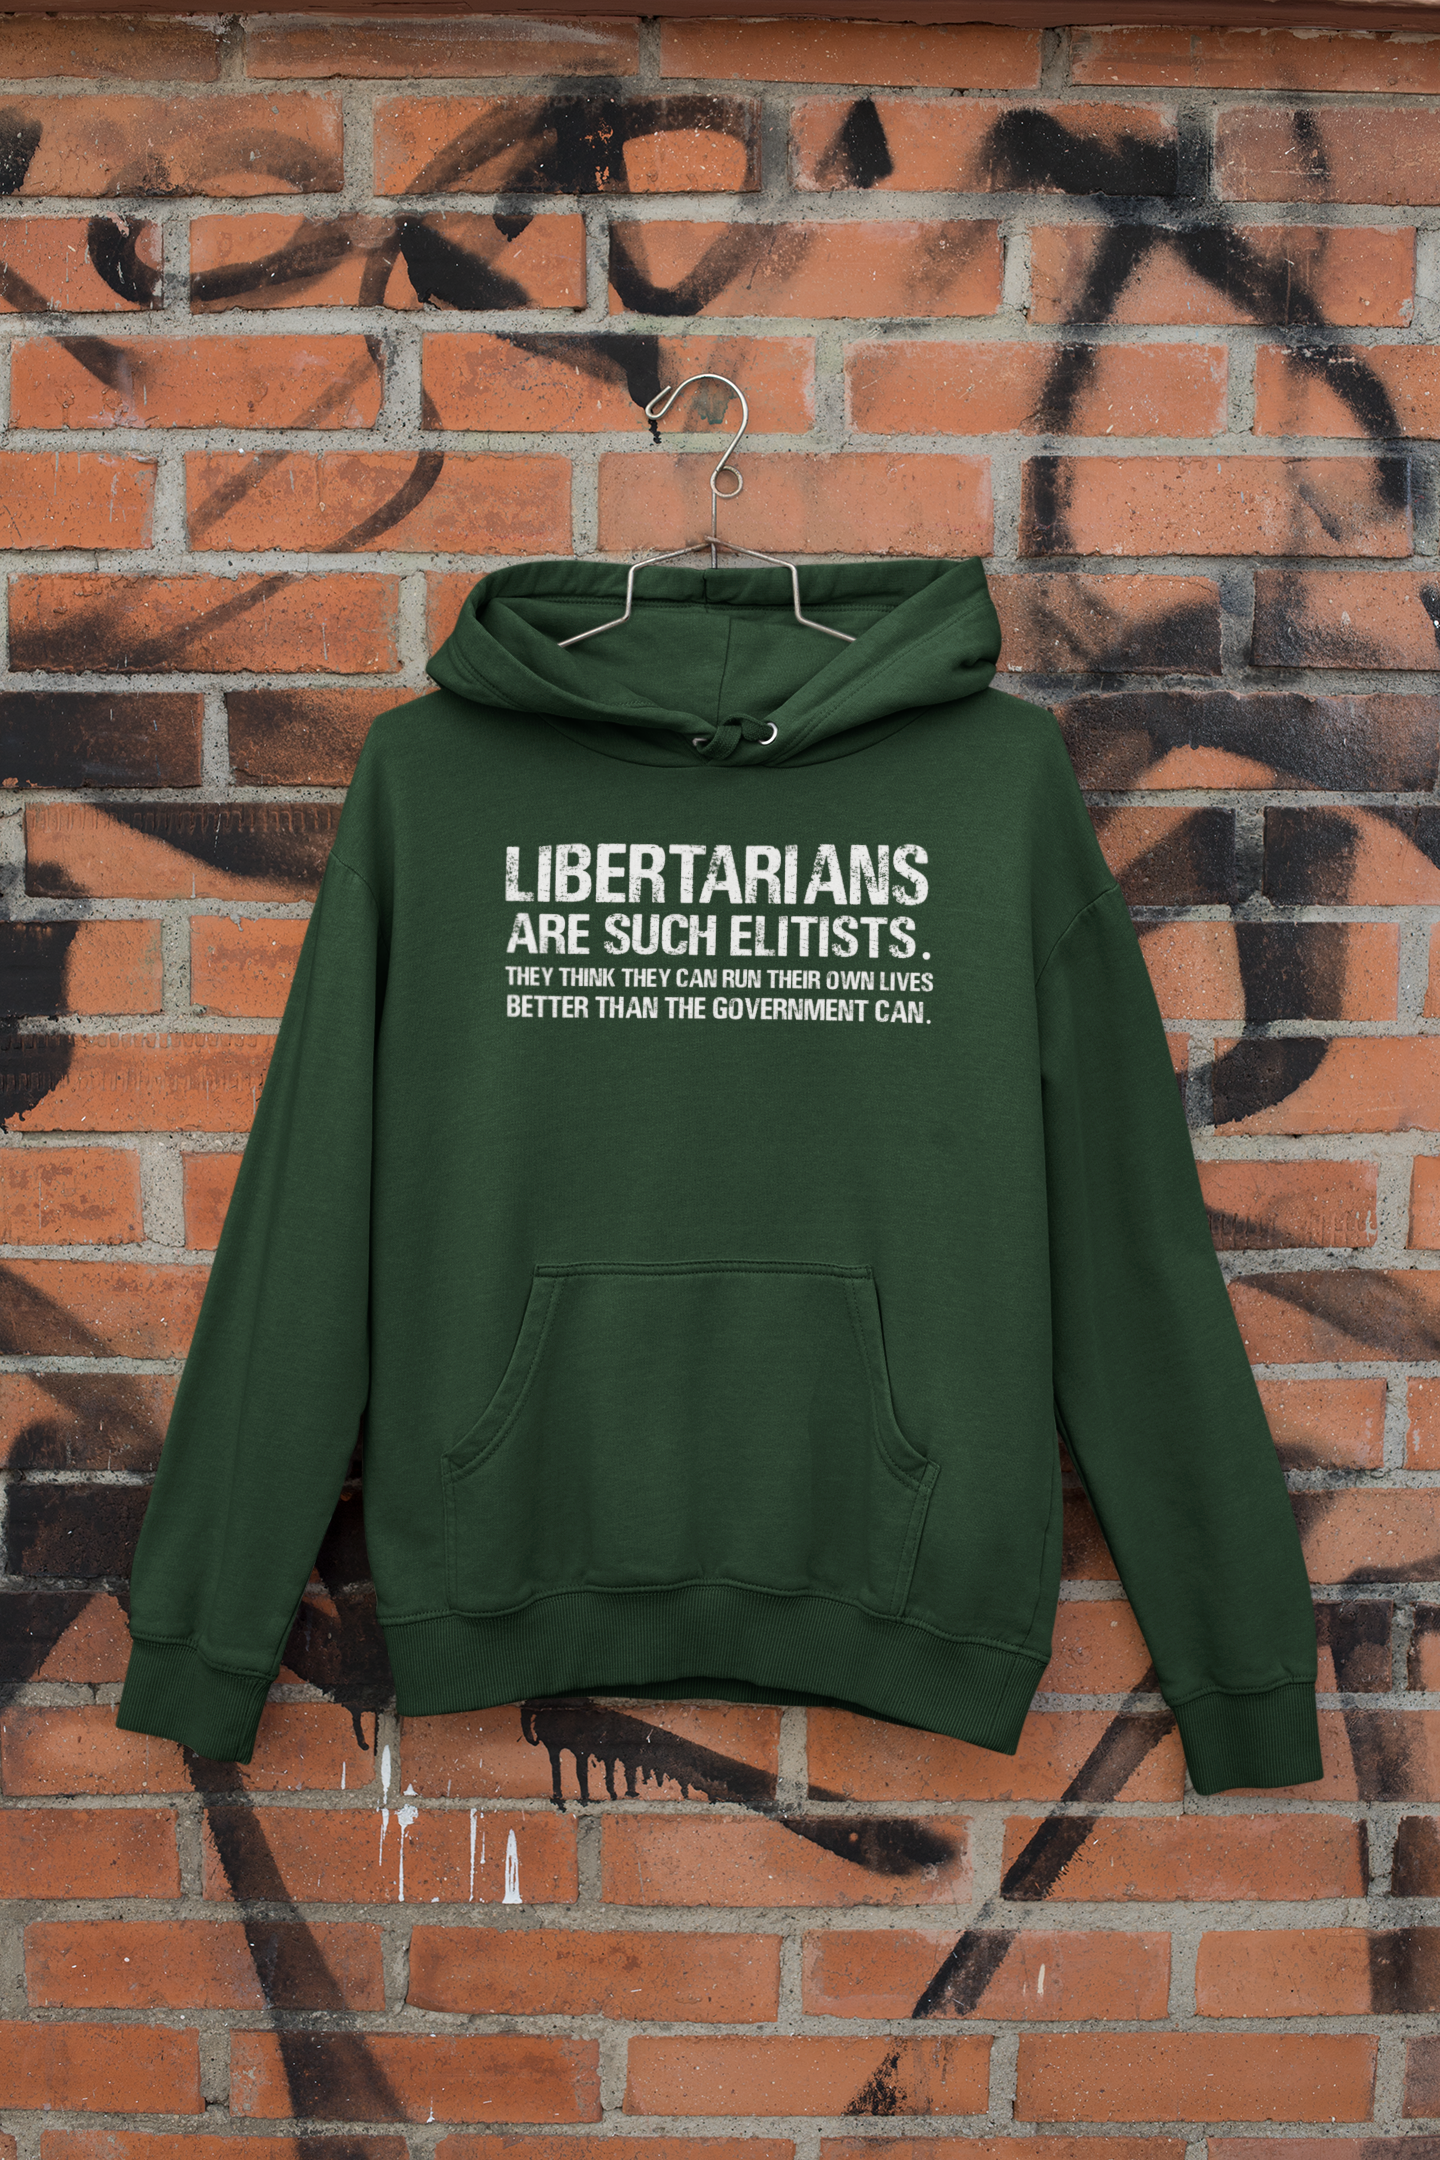 Libertarians Are Such Elitists They Think They Can Run Their Own Lives Better Than The Government Can Anti Government Hoodies for Women-FunkyTeesClub